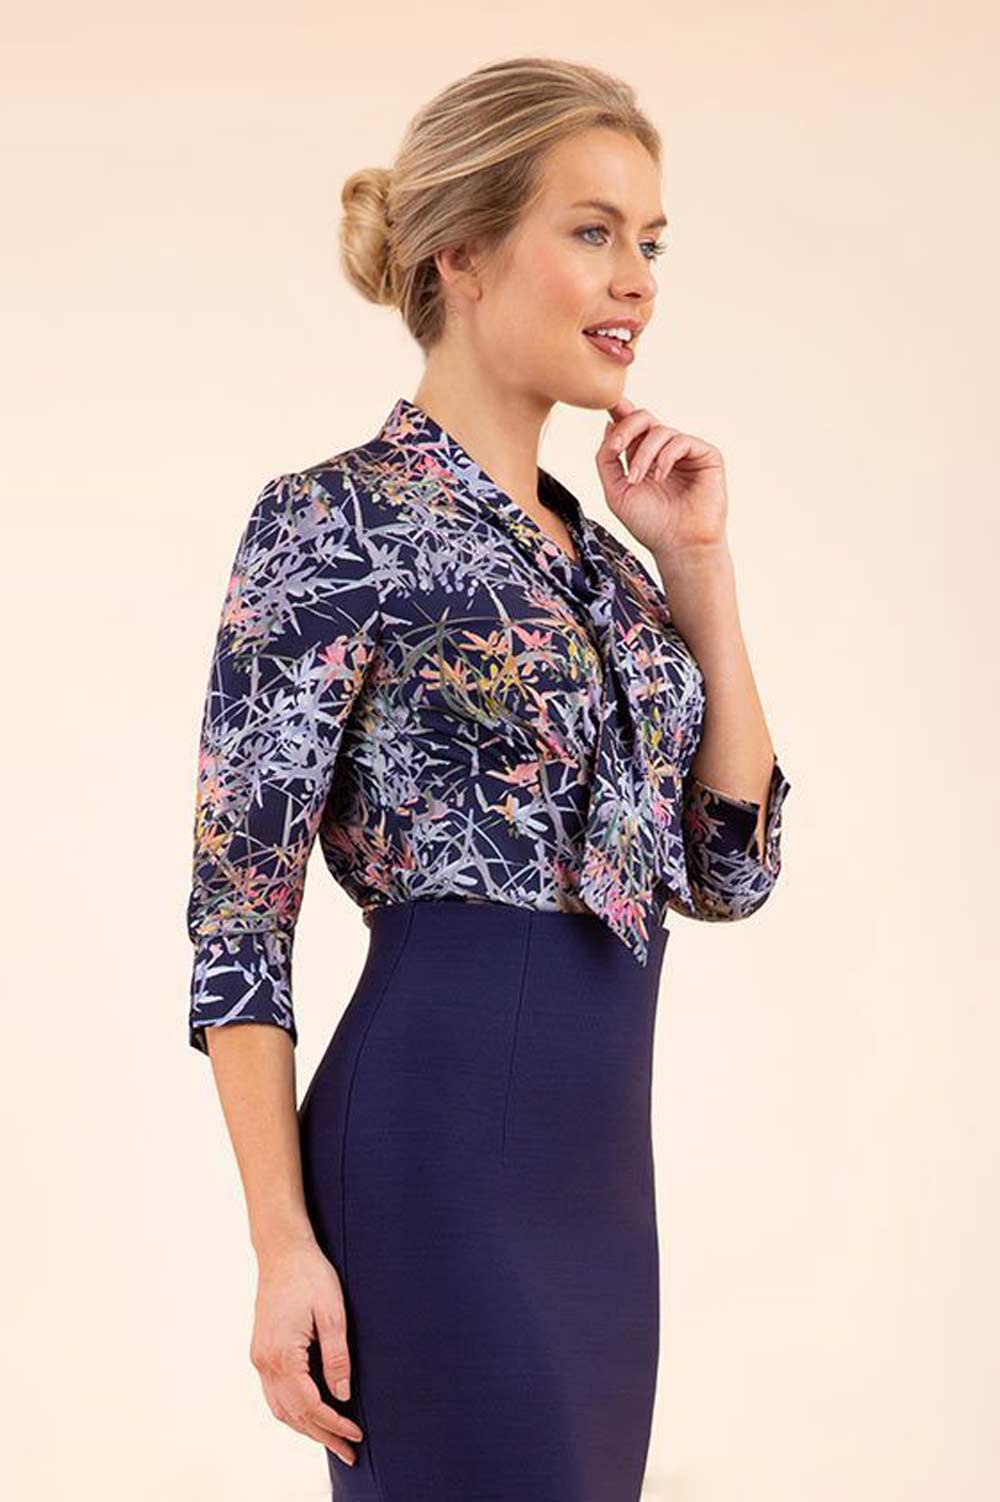 Model wearing the Diva floral top in navy blue front image